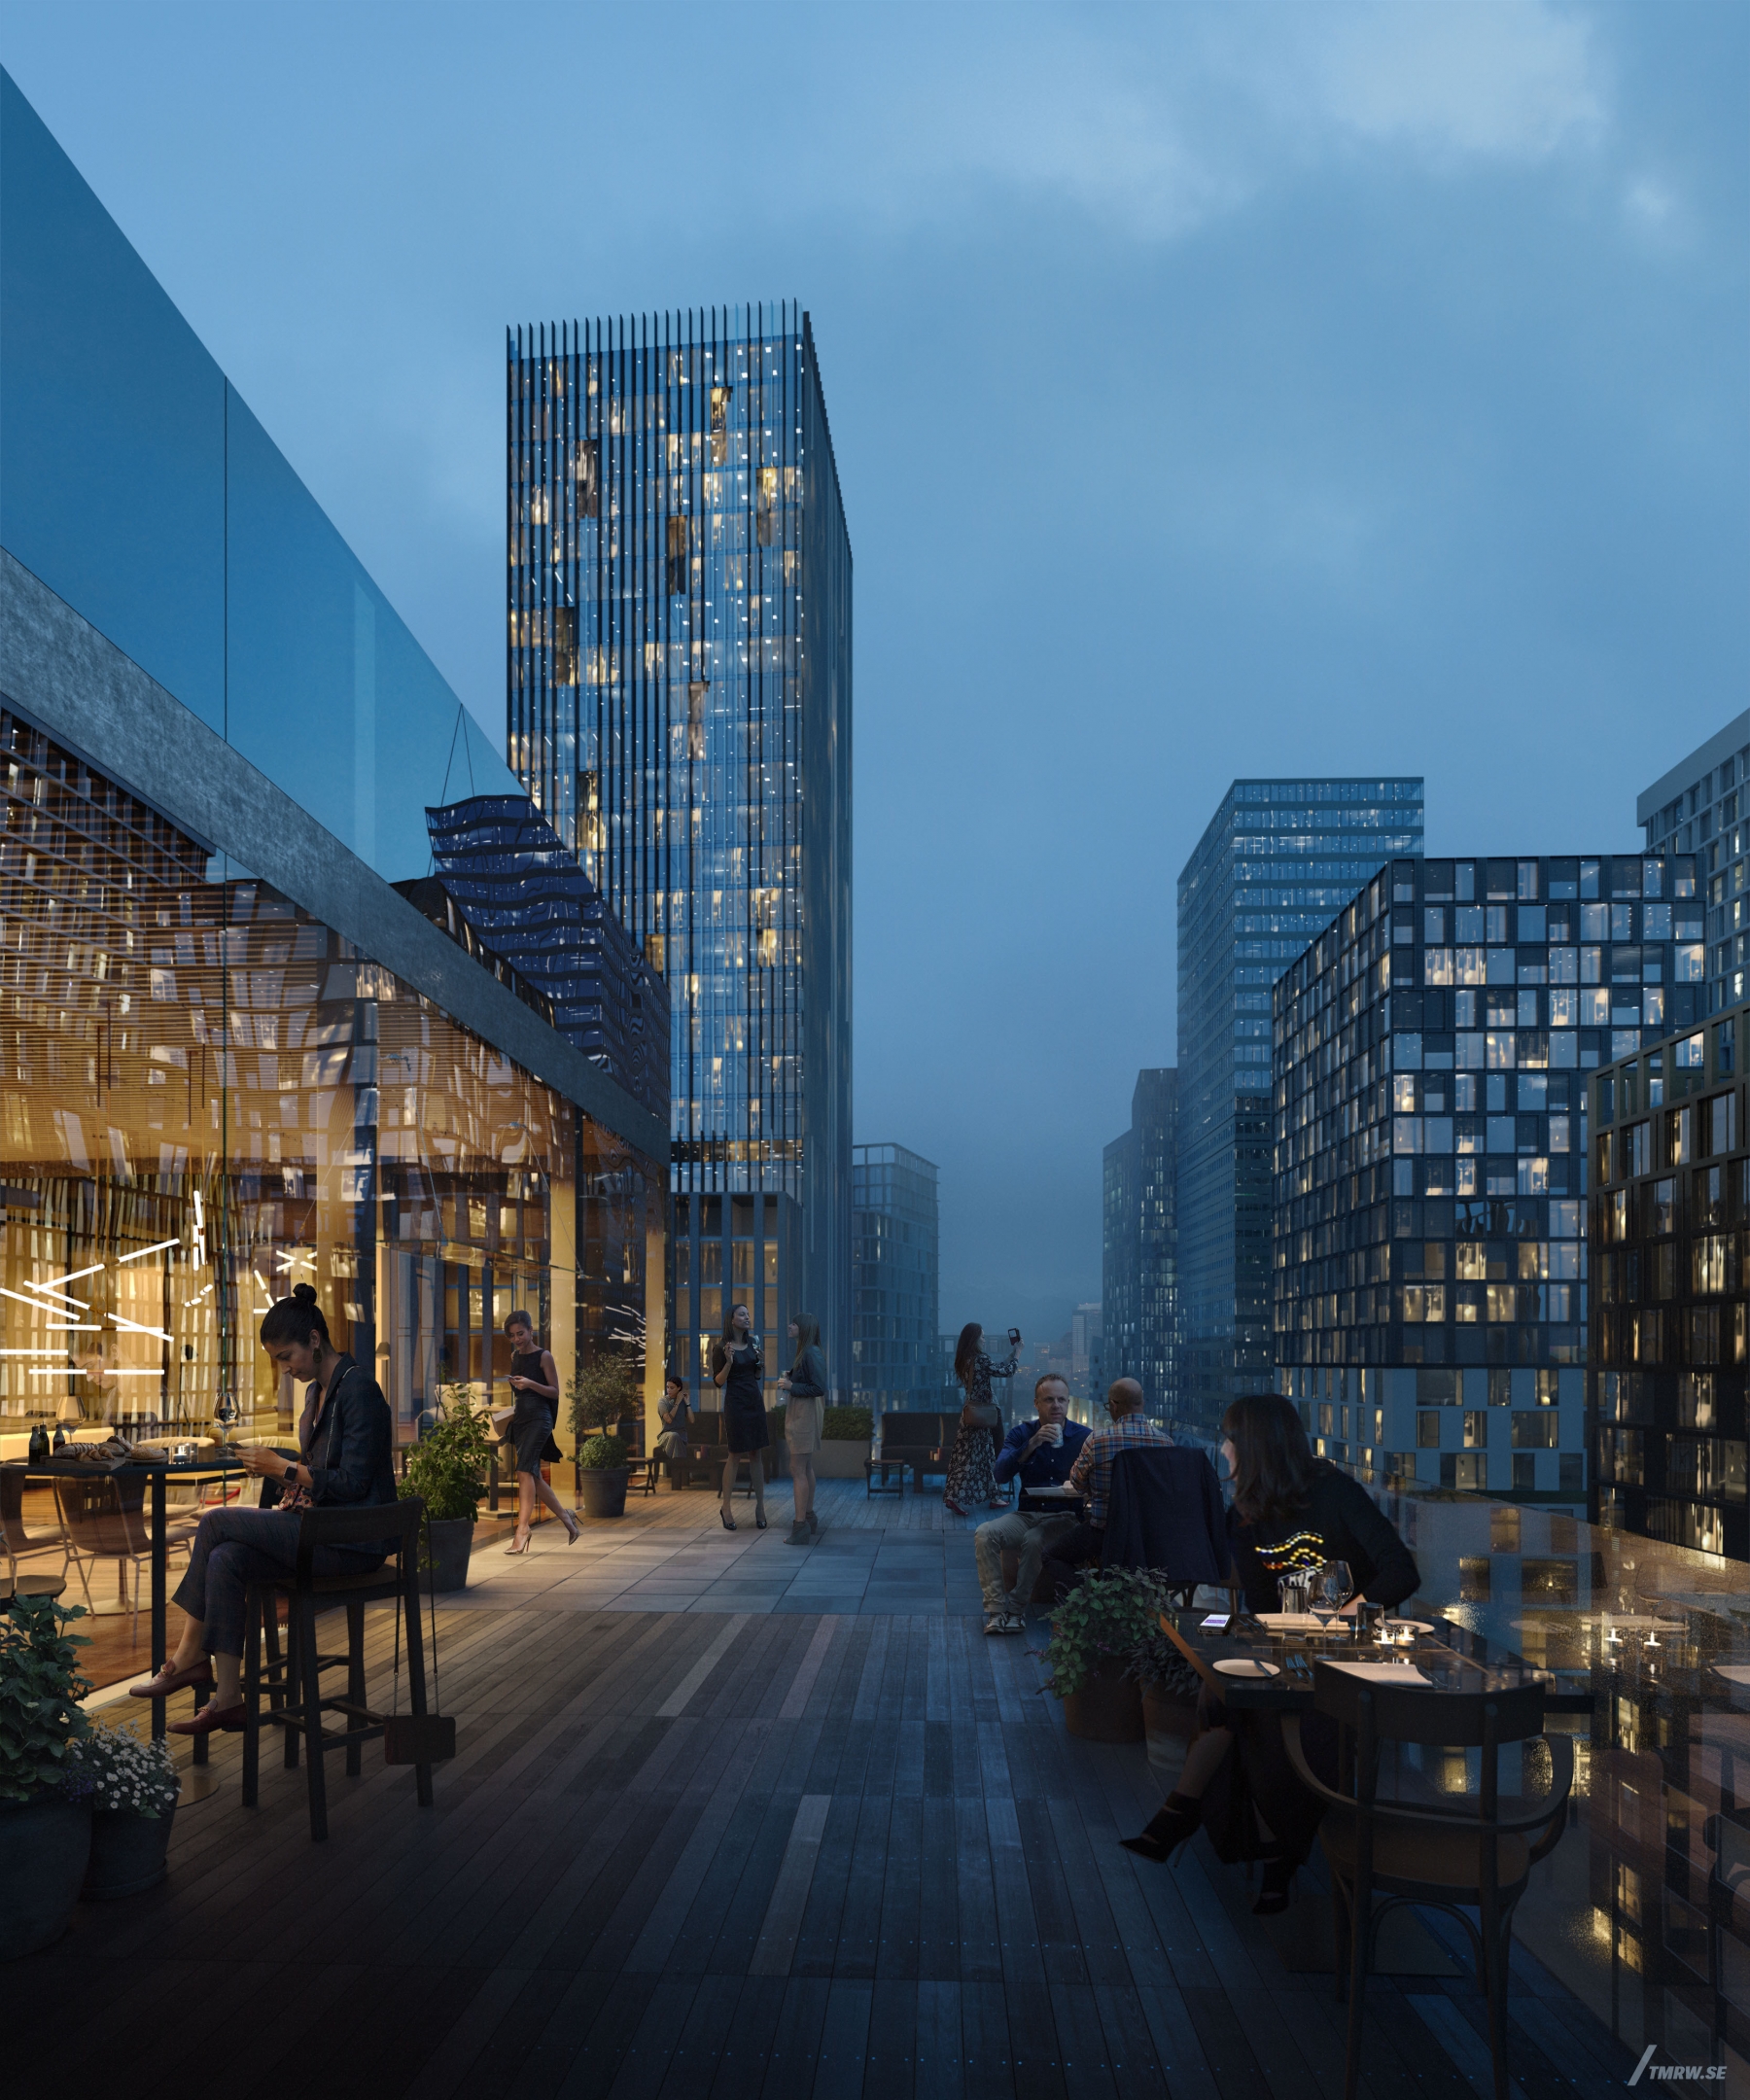 Architectural visualization of Flemingsberg for Fabege. An image of a roof top terrace with people dining. Skyscrapes in the background at night from semi aerial view.